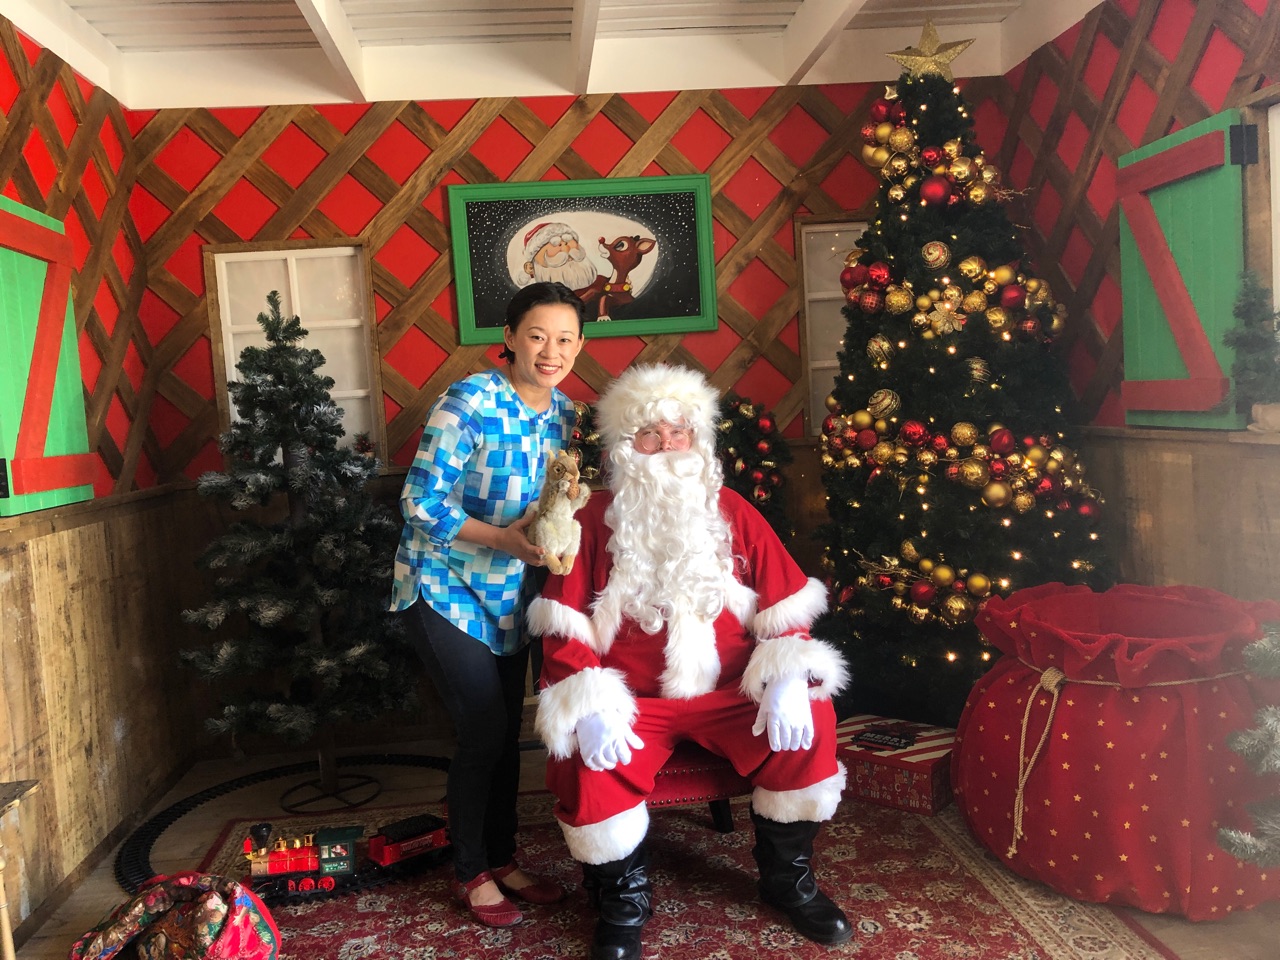 Our optometrist Dr SooJin was lucky enough to visit Santa’s home. It’s actually quite near when you ride a sleigh.